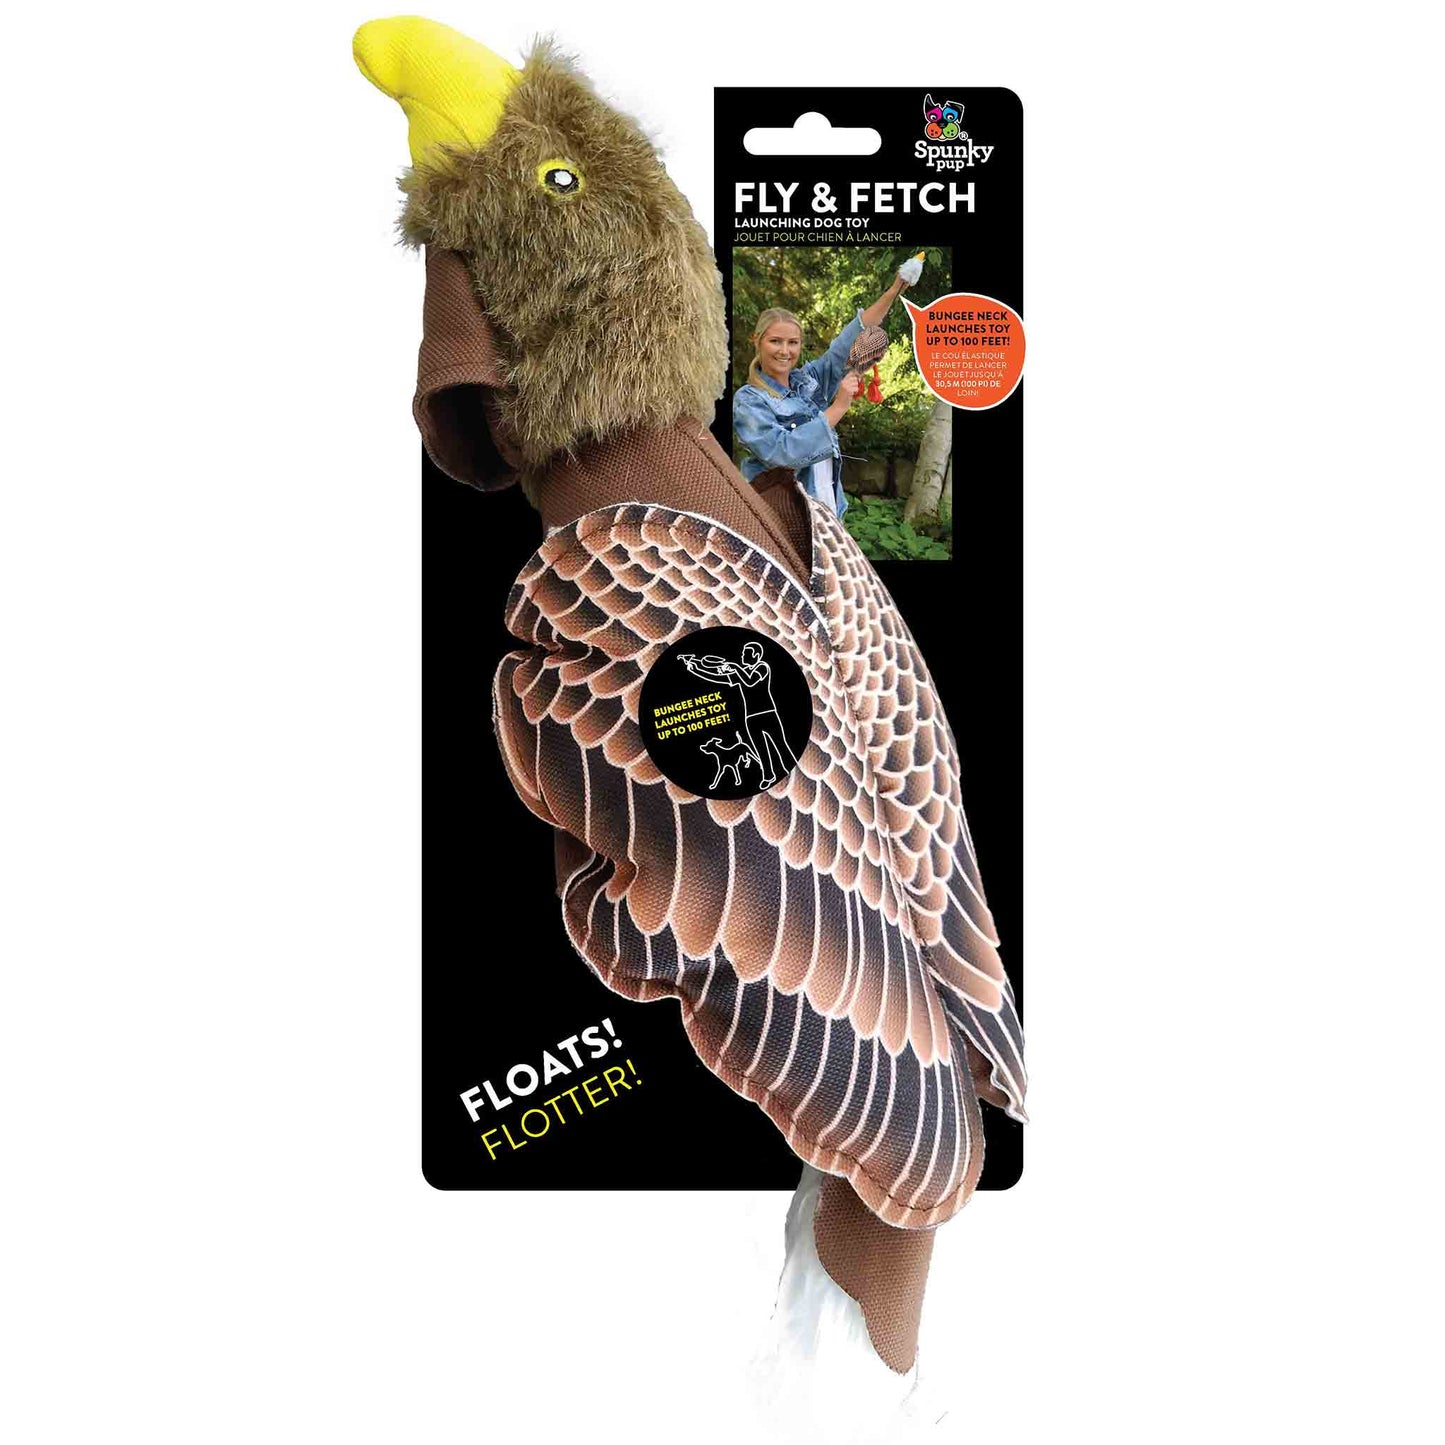 Fly and Fetch Eagle Dog Toy from Floyd & Fleet